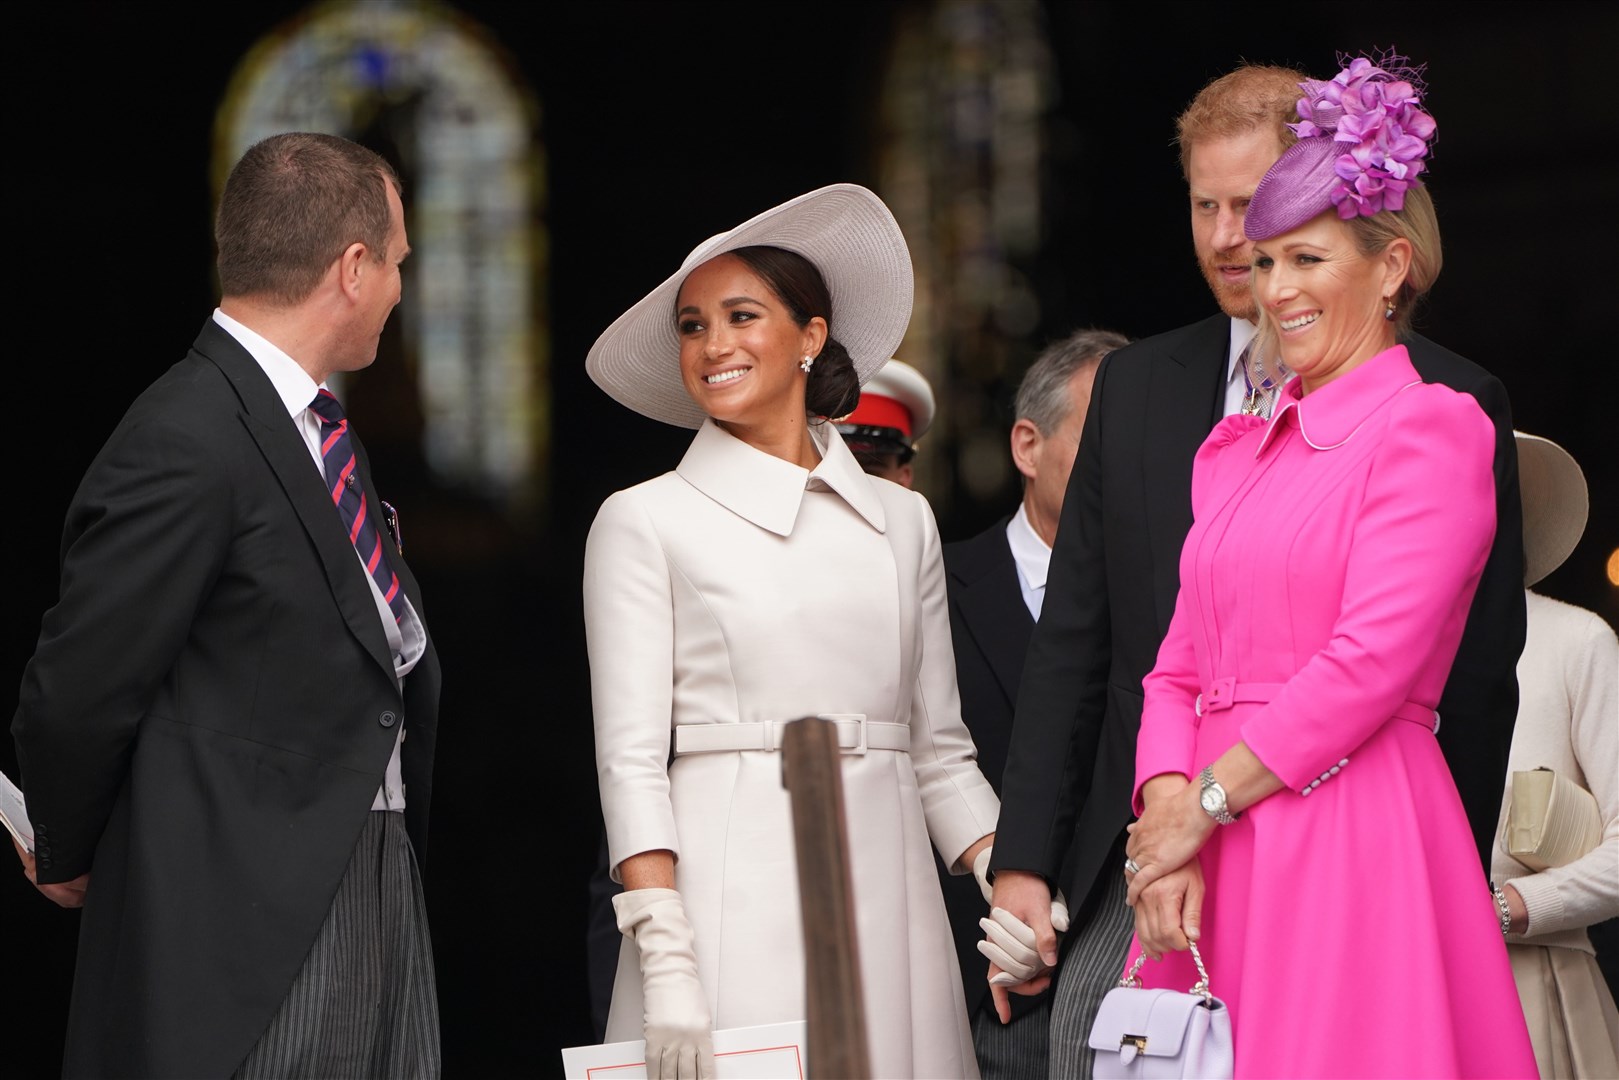 Meghan spoke to Harry’s cousins Peter Phillips and Zara Tindall as they left the service (Kirsty O’Connor/PA)